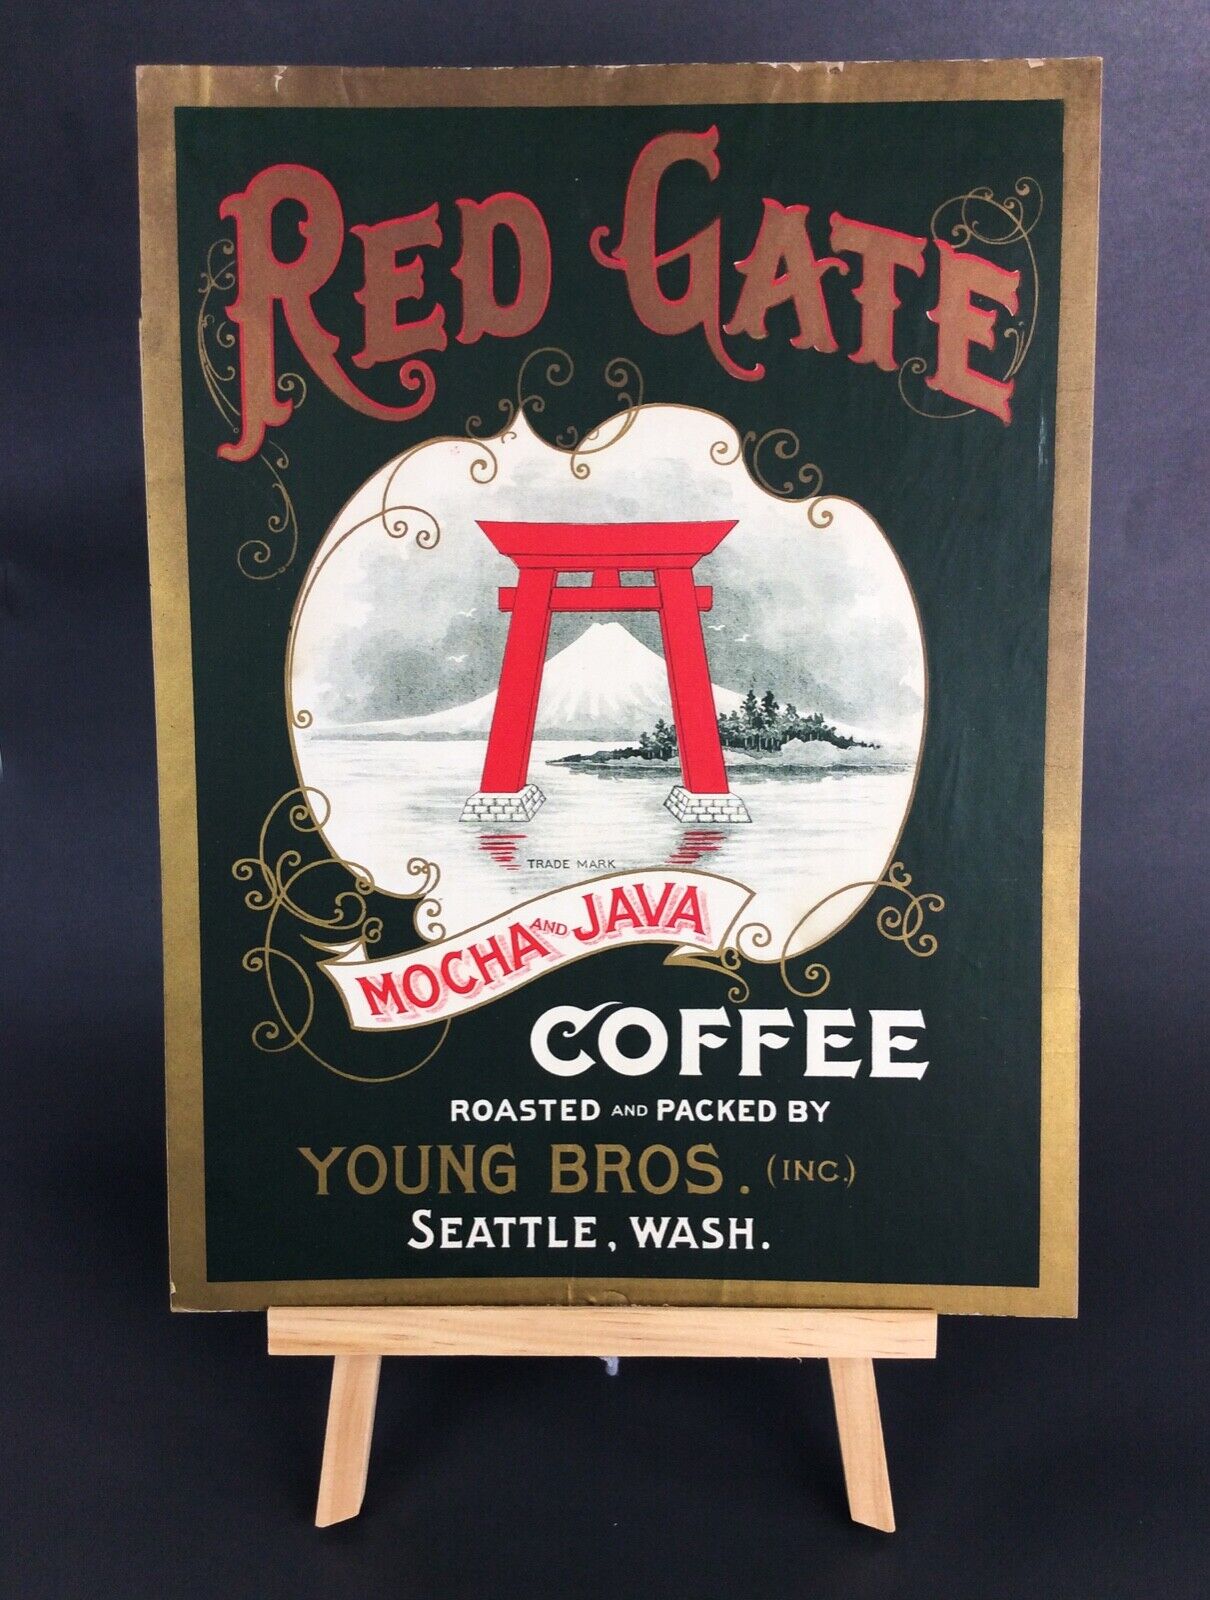 Original Antique Red Gate Coffee Commercial Advertising Poster Seattle WA